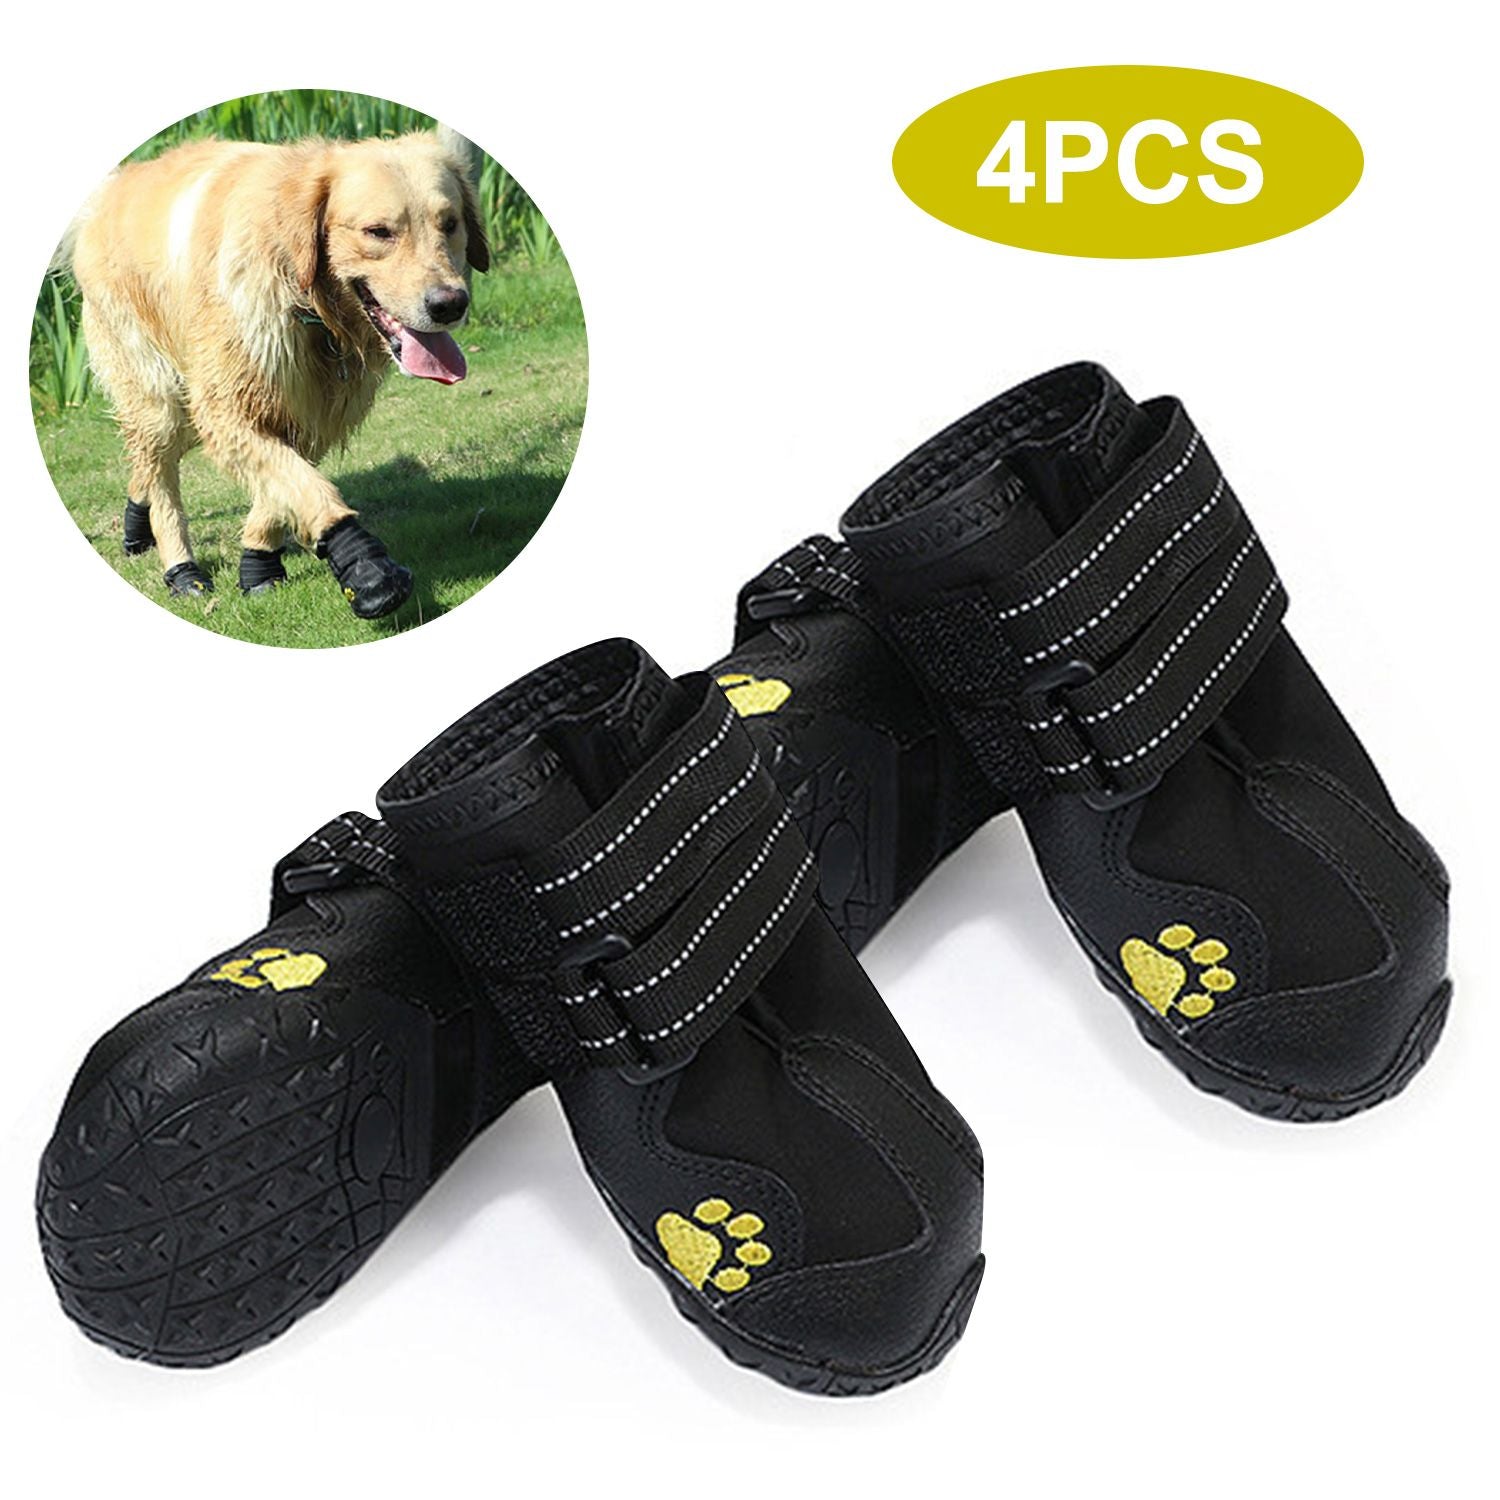 Dog Shoes Boots Waterproof Shoes for Dogs with Reflective - size 8